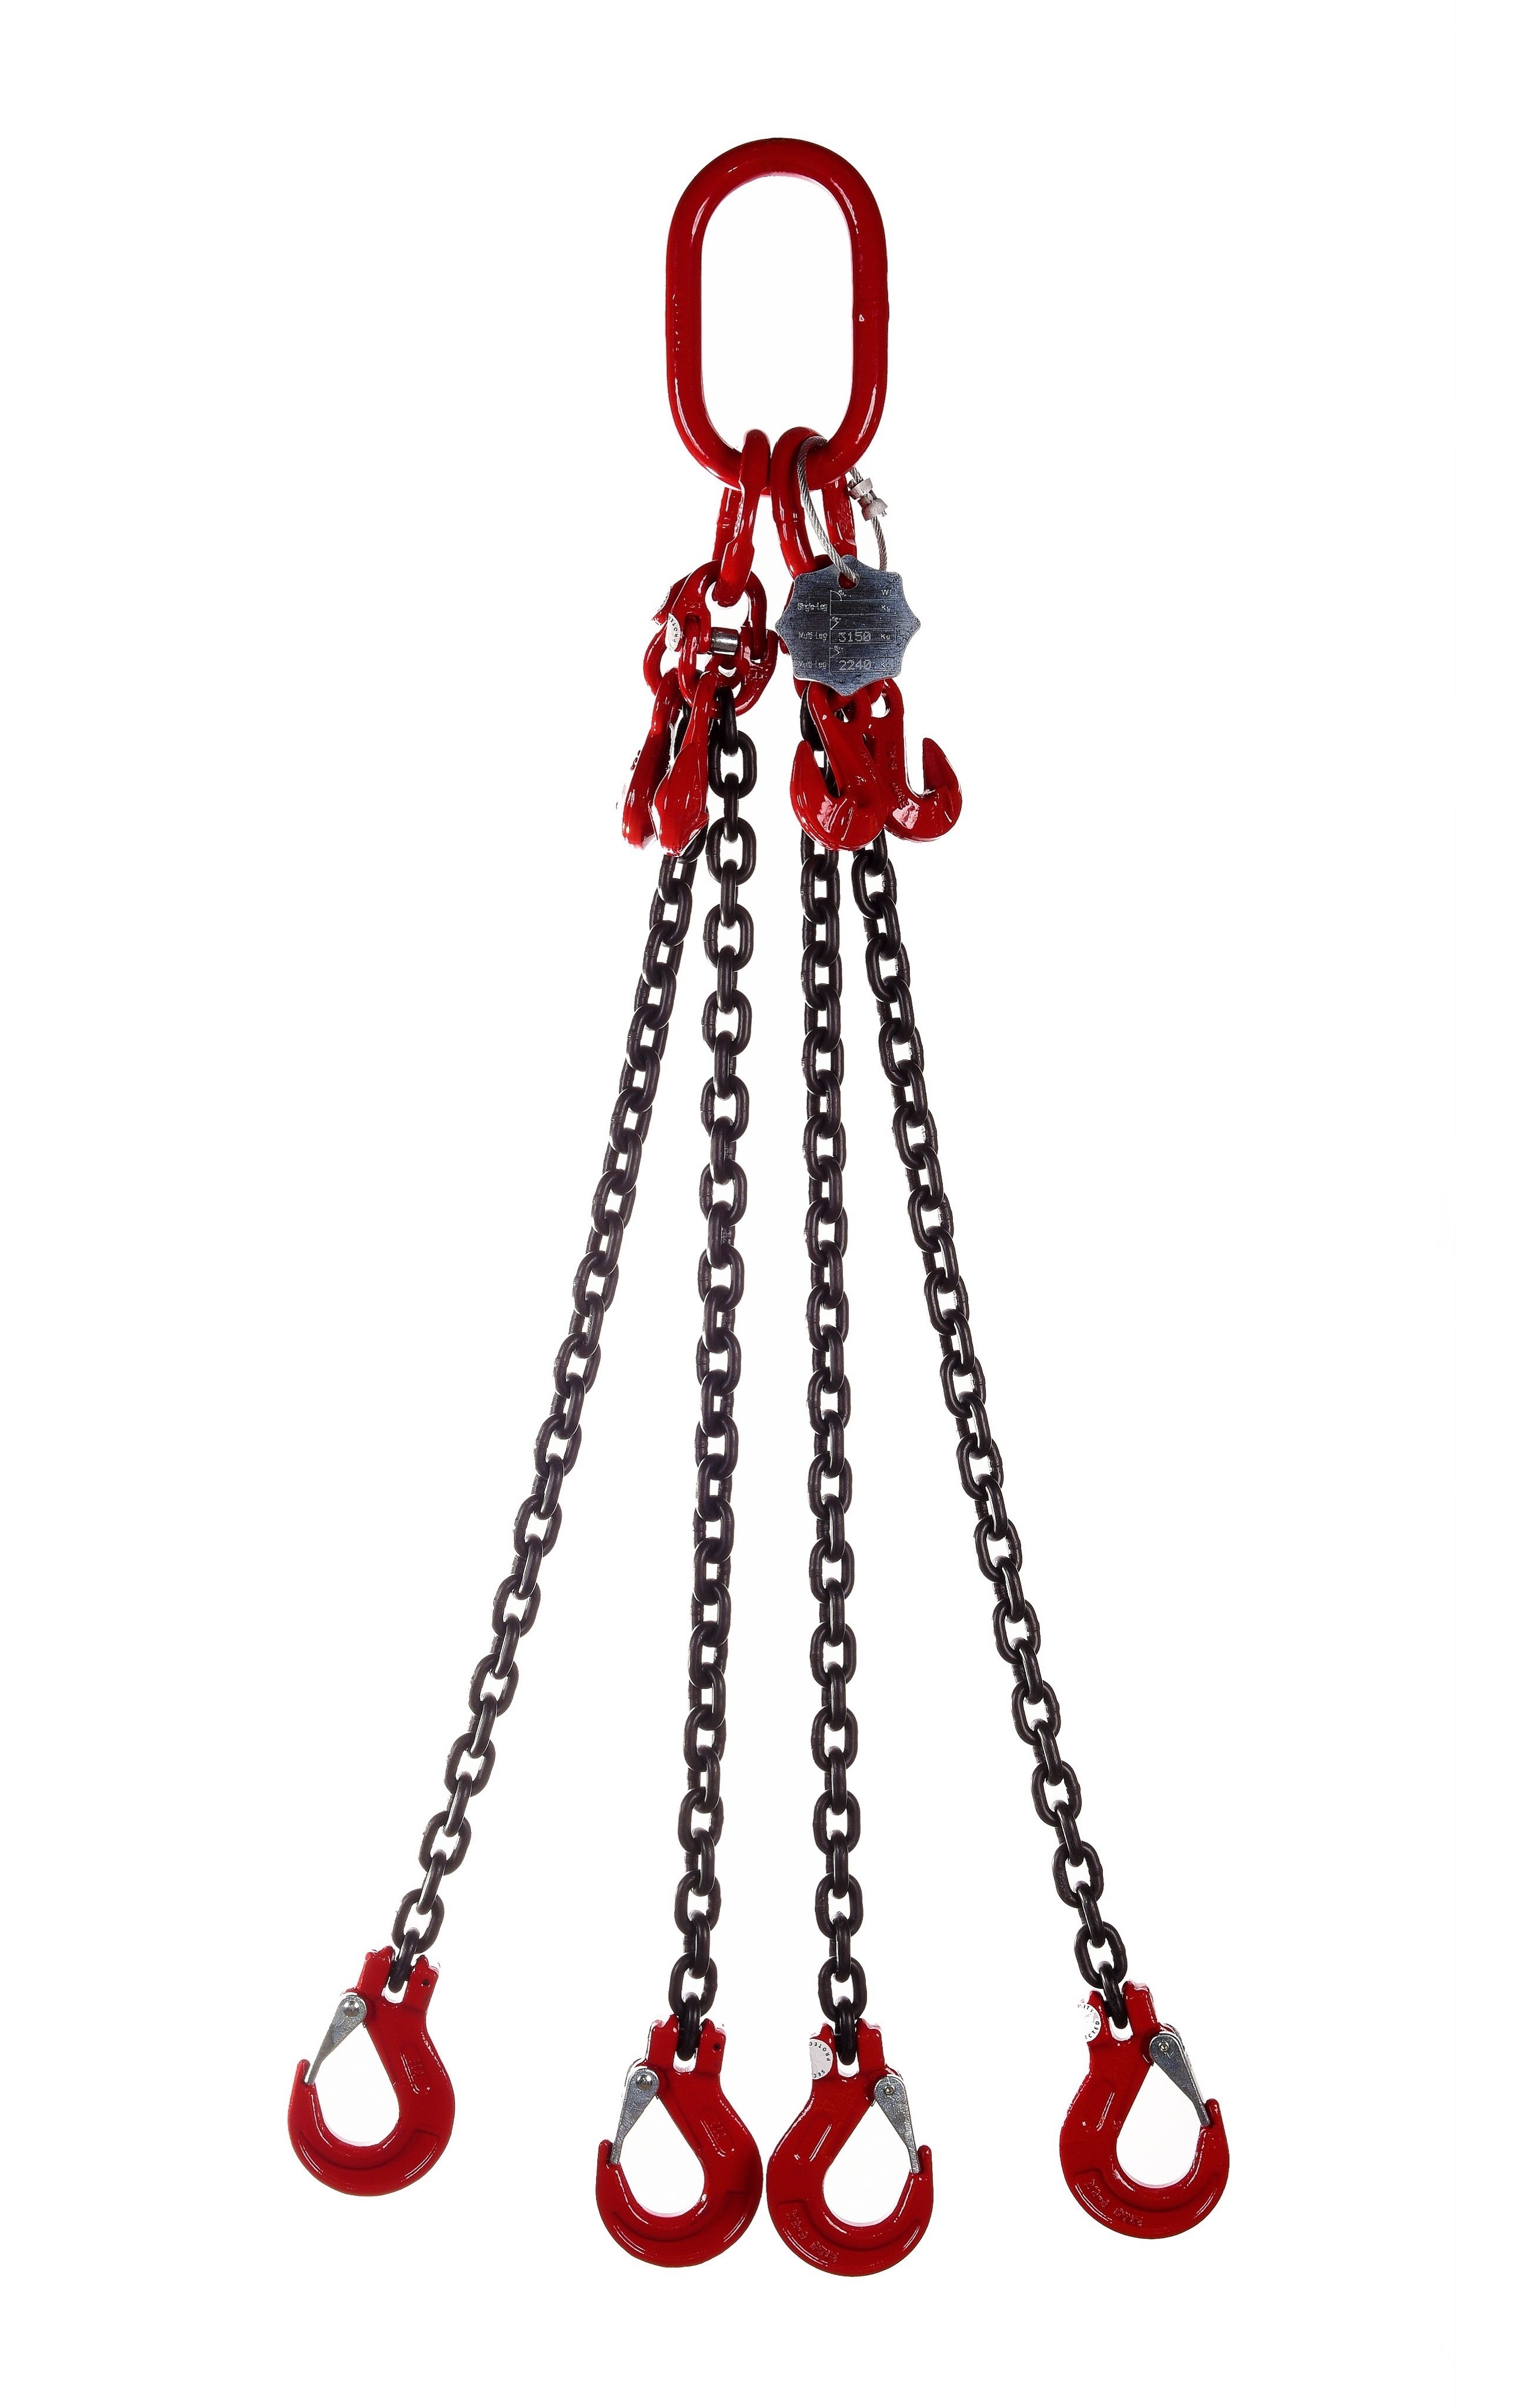 4 Leg 23.6tonne 19mm Lifting Chain Sling with choice of length and hooks – With Shortening Hook – 10mtr – Clevis Sling Hook – Chain Slings – WSB